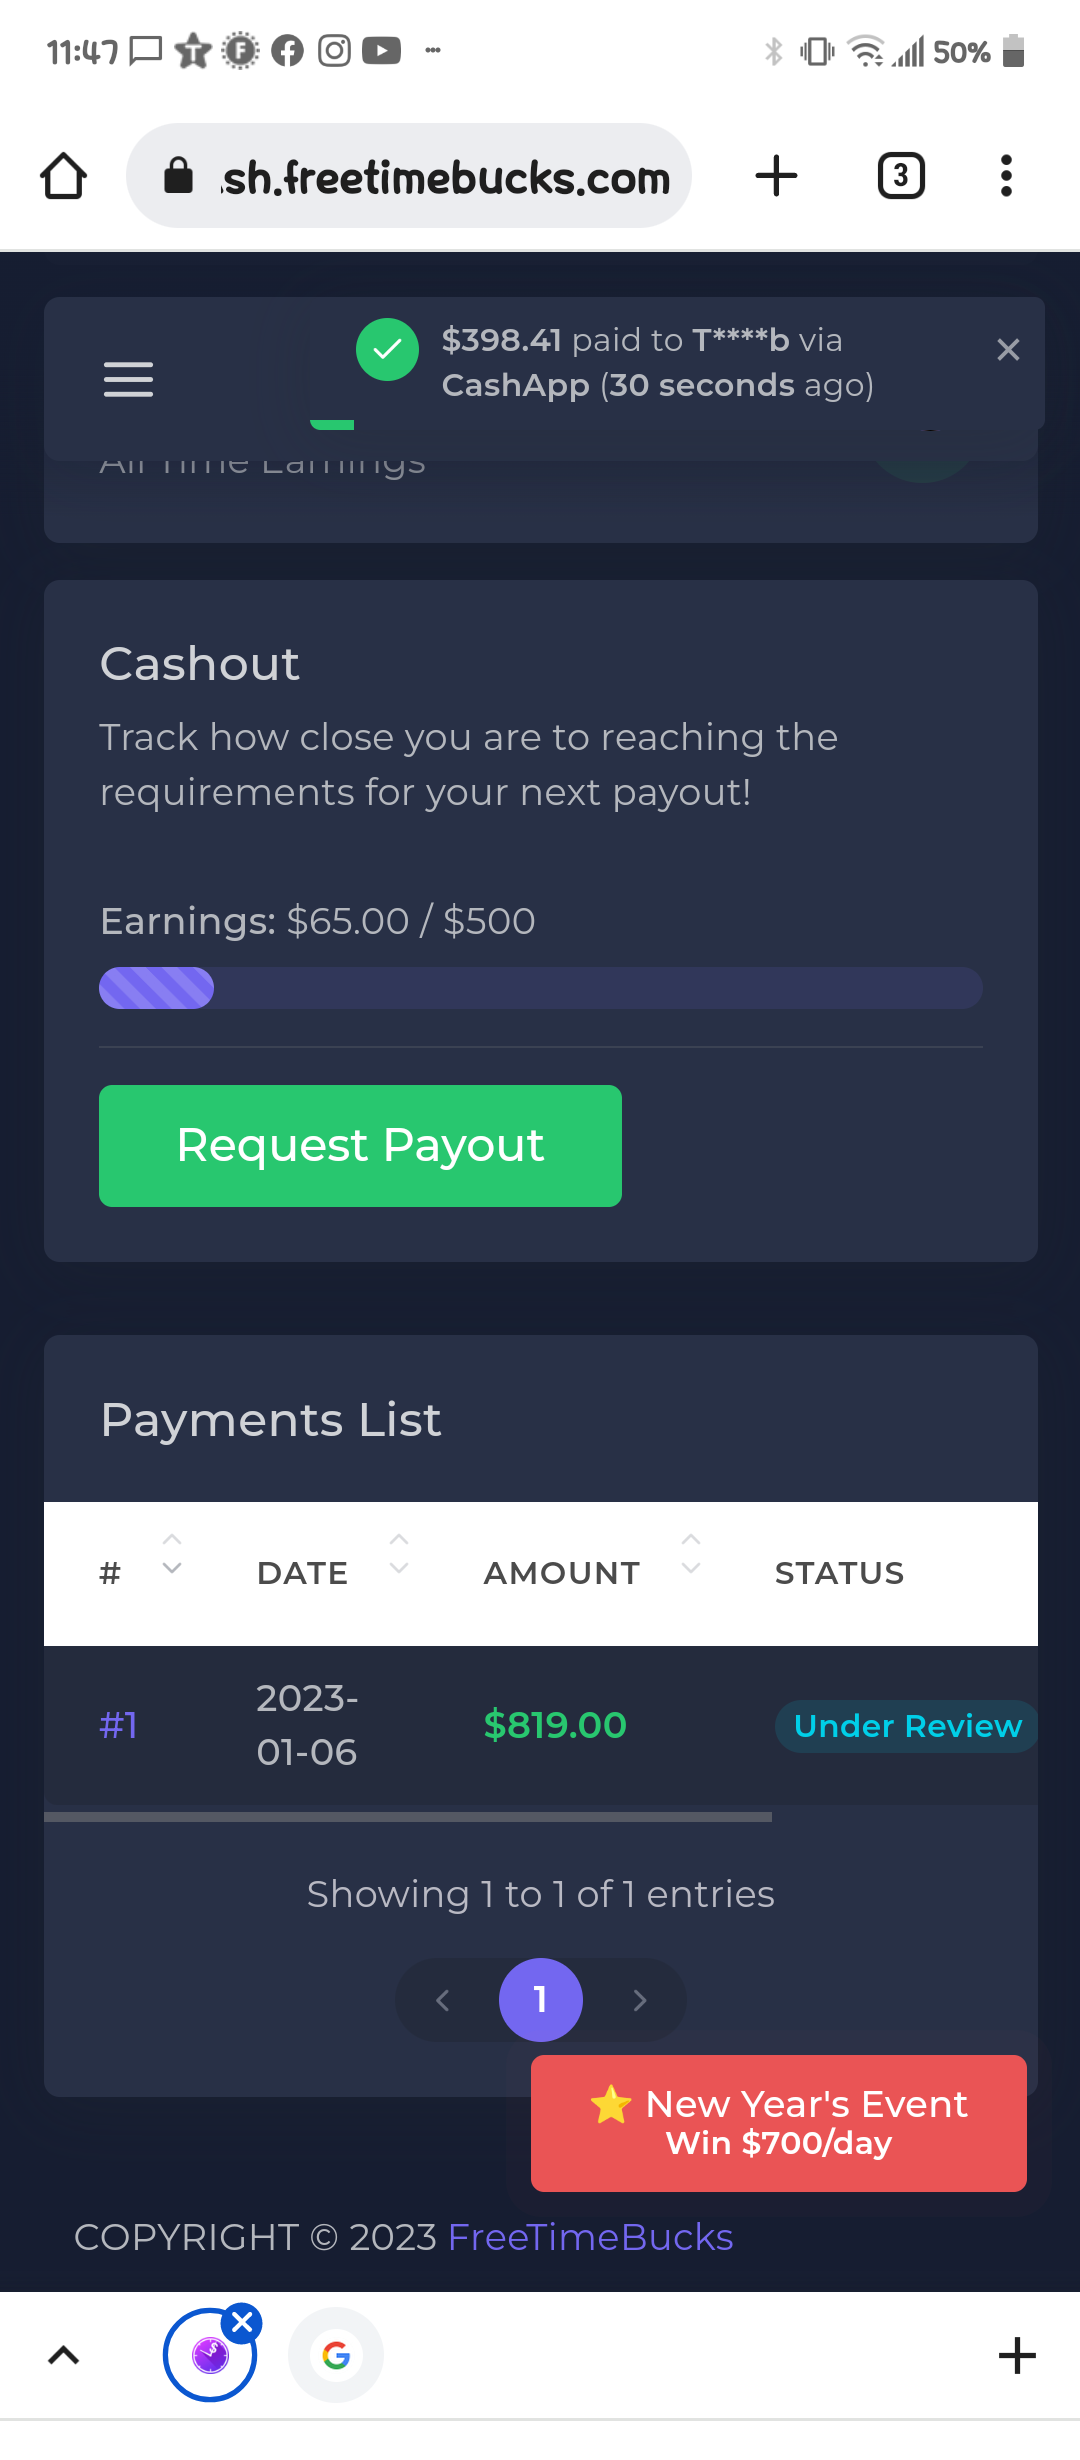 Payment stuck on under review since 1/6/2023